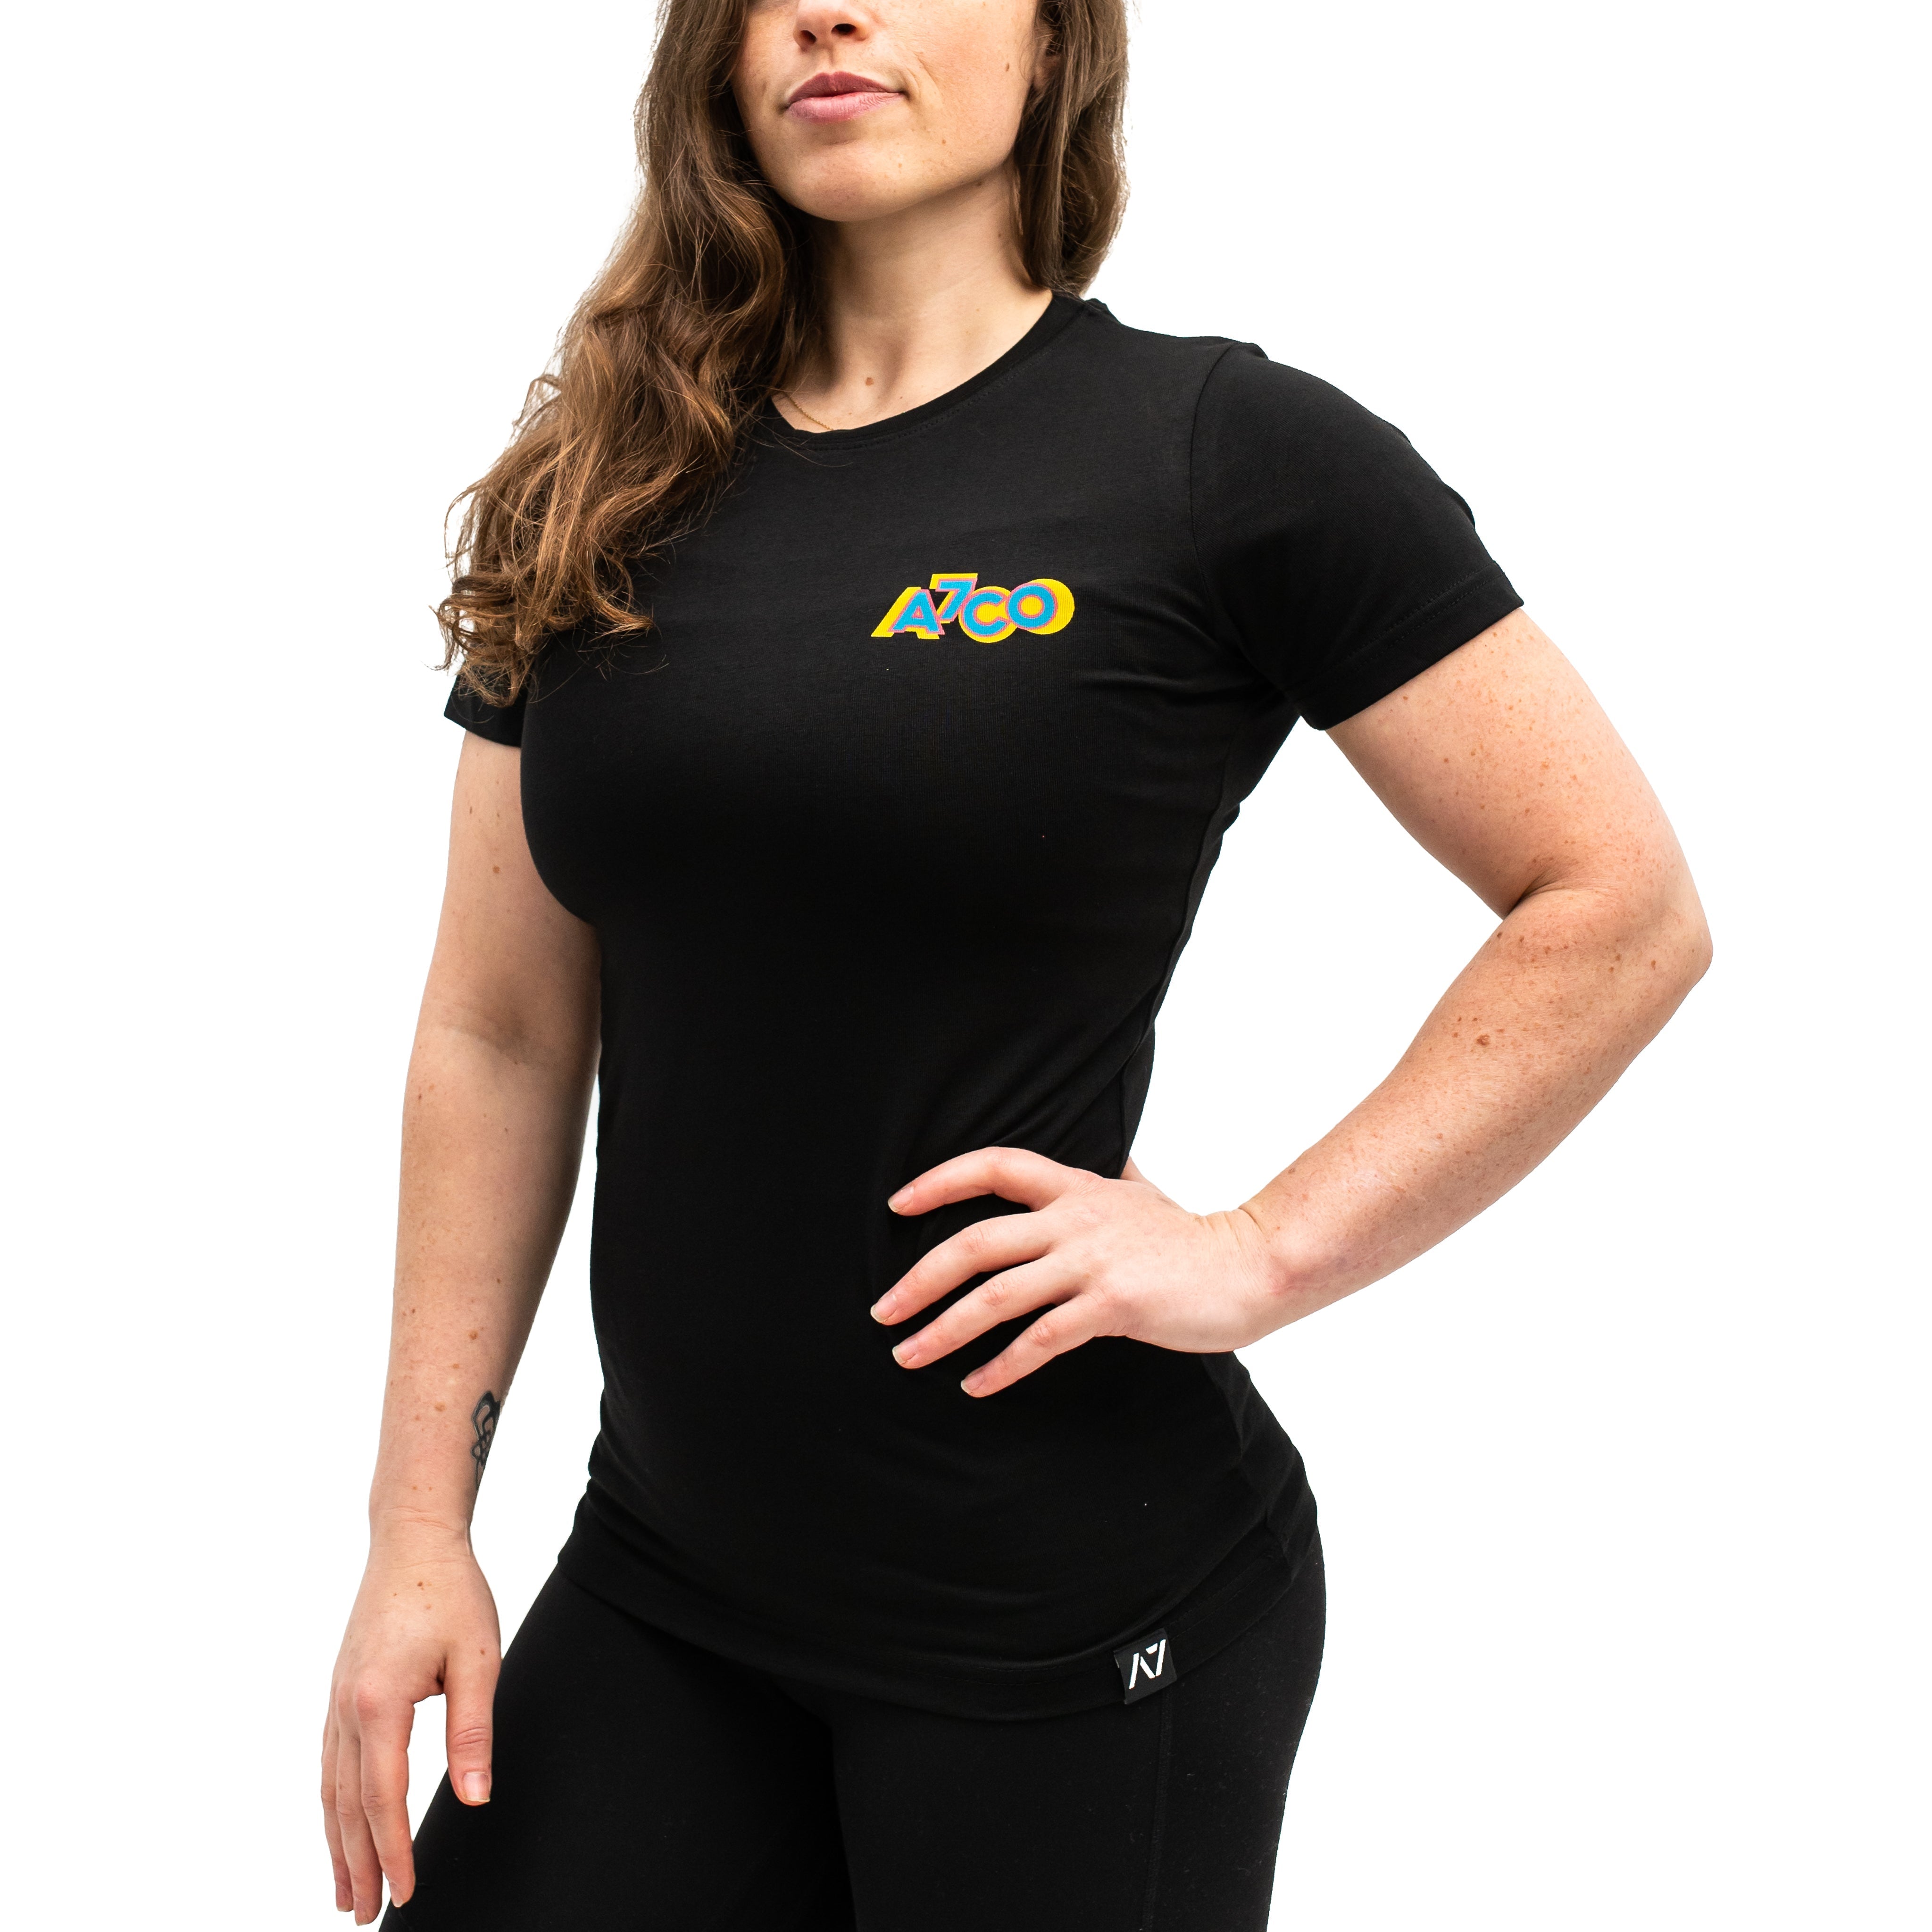 Kilos and Barbells Overtone Non Bar Grip Shirt combines the dark with the fun and colourful designs to bring that pop of colour into the daily workouts. The Kilos and Barbells Overtone Shirt is great for powerlifters. Purchase Kilos and Barbells Overtone shirt from A7 UK and A7 Europe. Kilos and Barbells Shirt is great for both in and out the gym. A7UK has the best Powerlifting apparel for all your workouts. Available in UK and Europe including France, Italy, Germany, the Netherlands, Sweden and Poland.